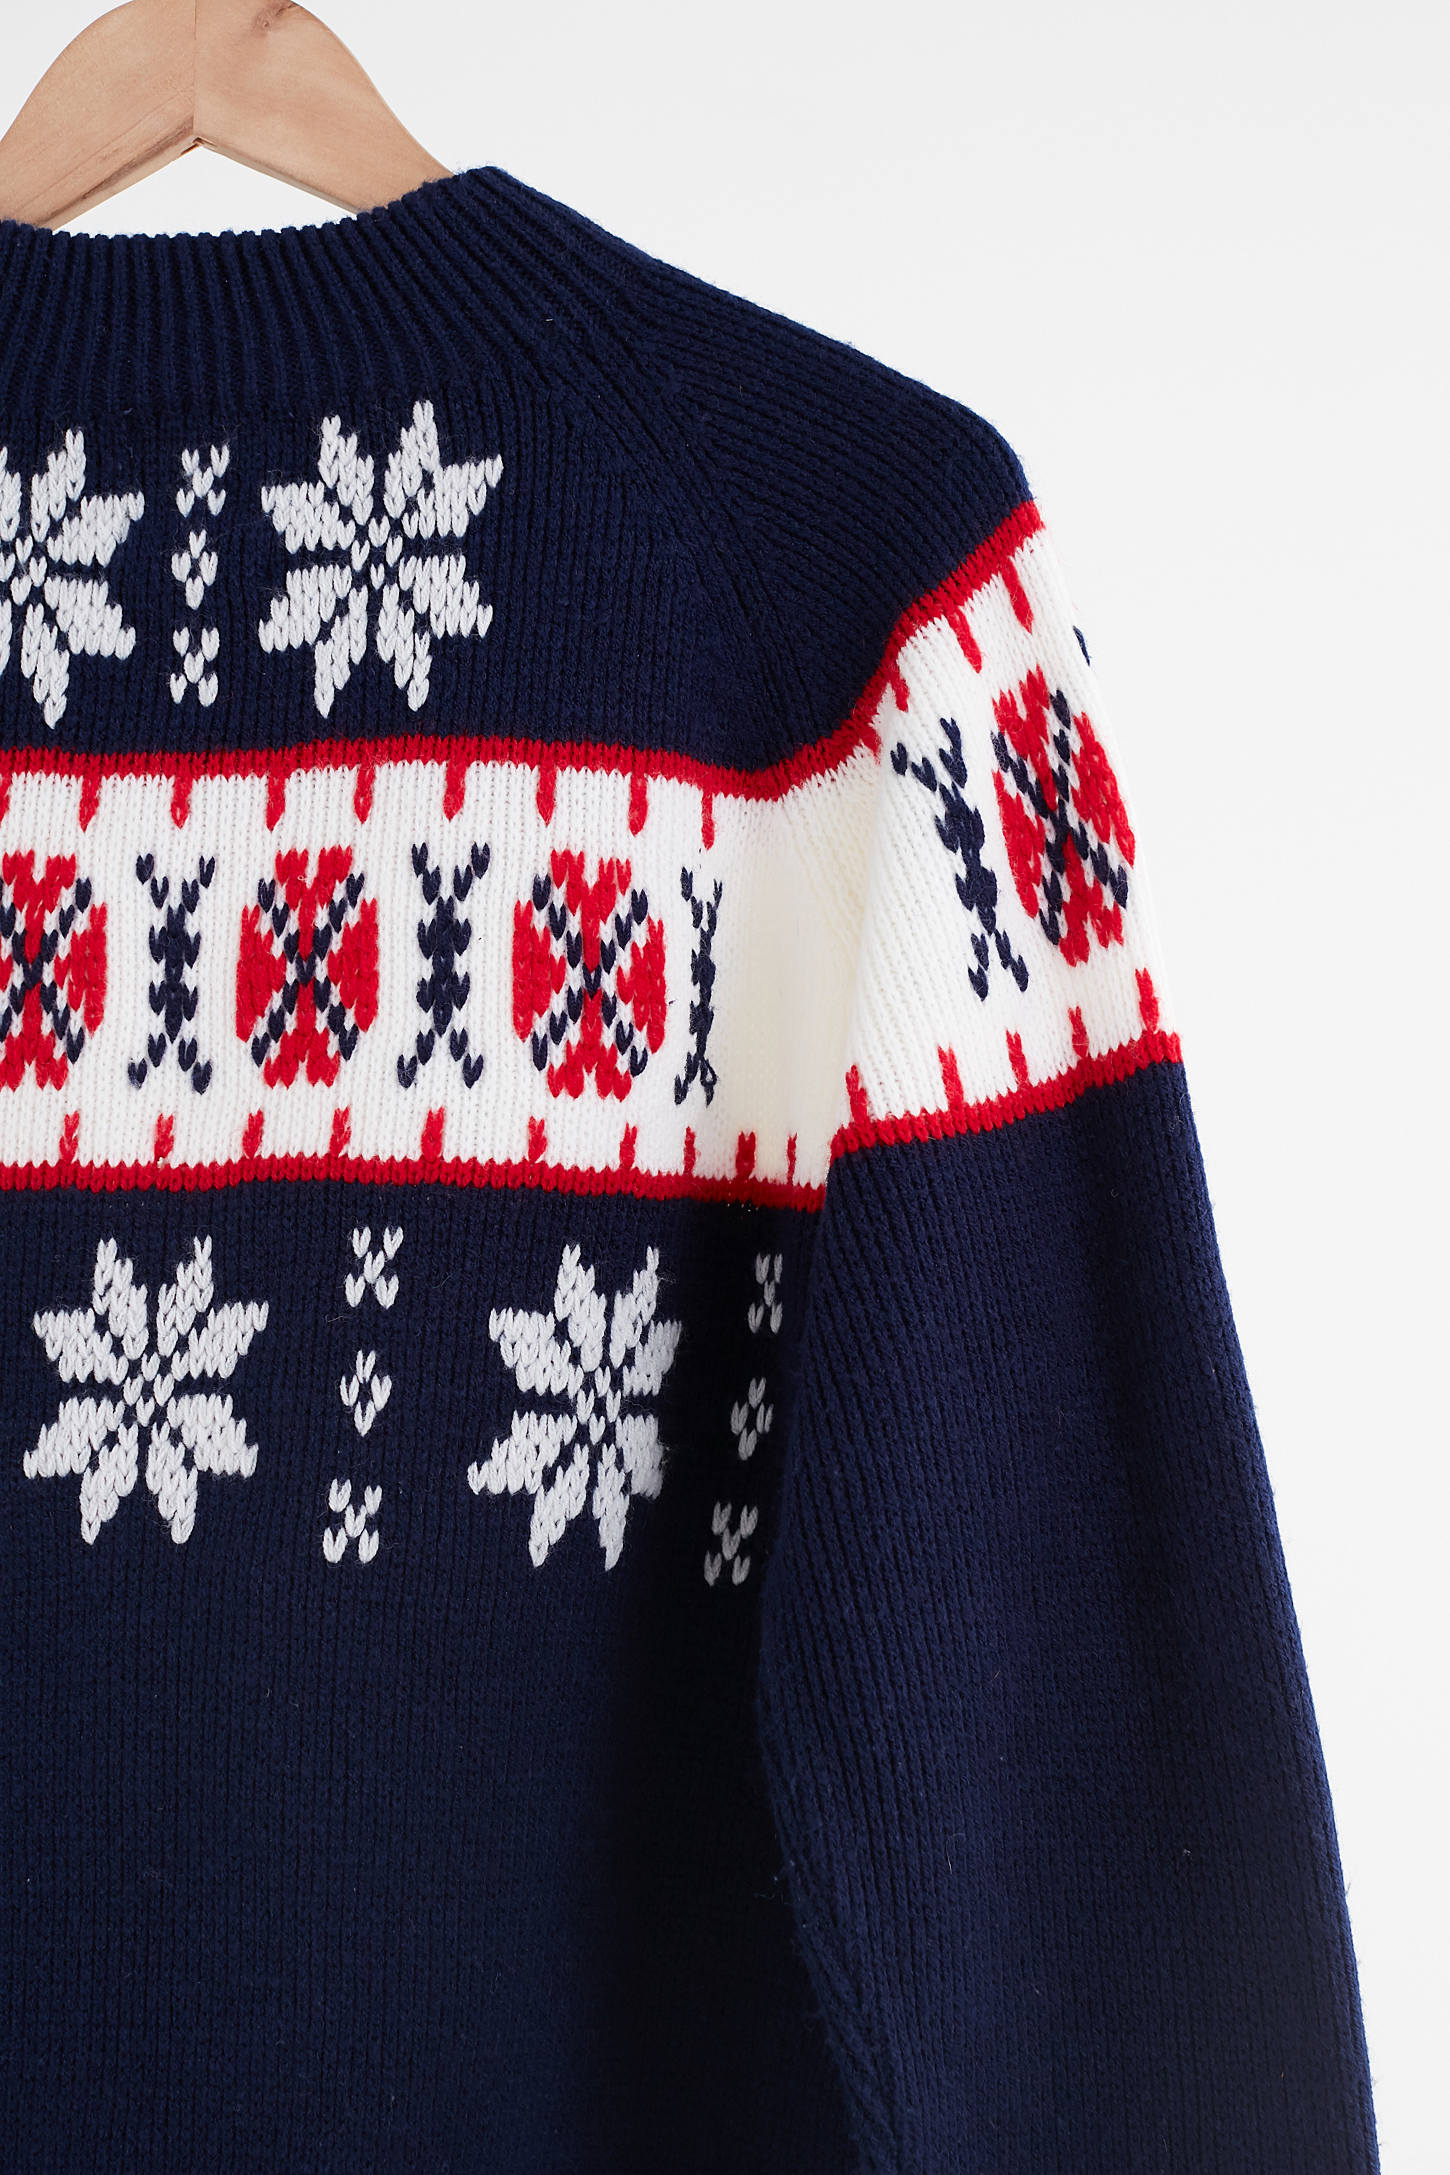 Vintage Navy Blue Fair Isle Ski Sweater | Urban Outfitters Canada